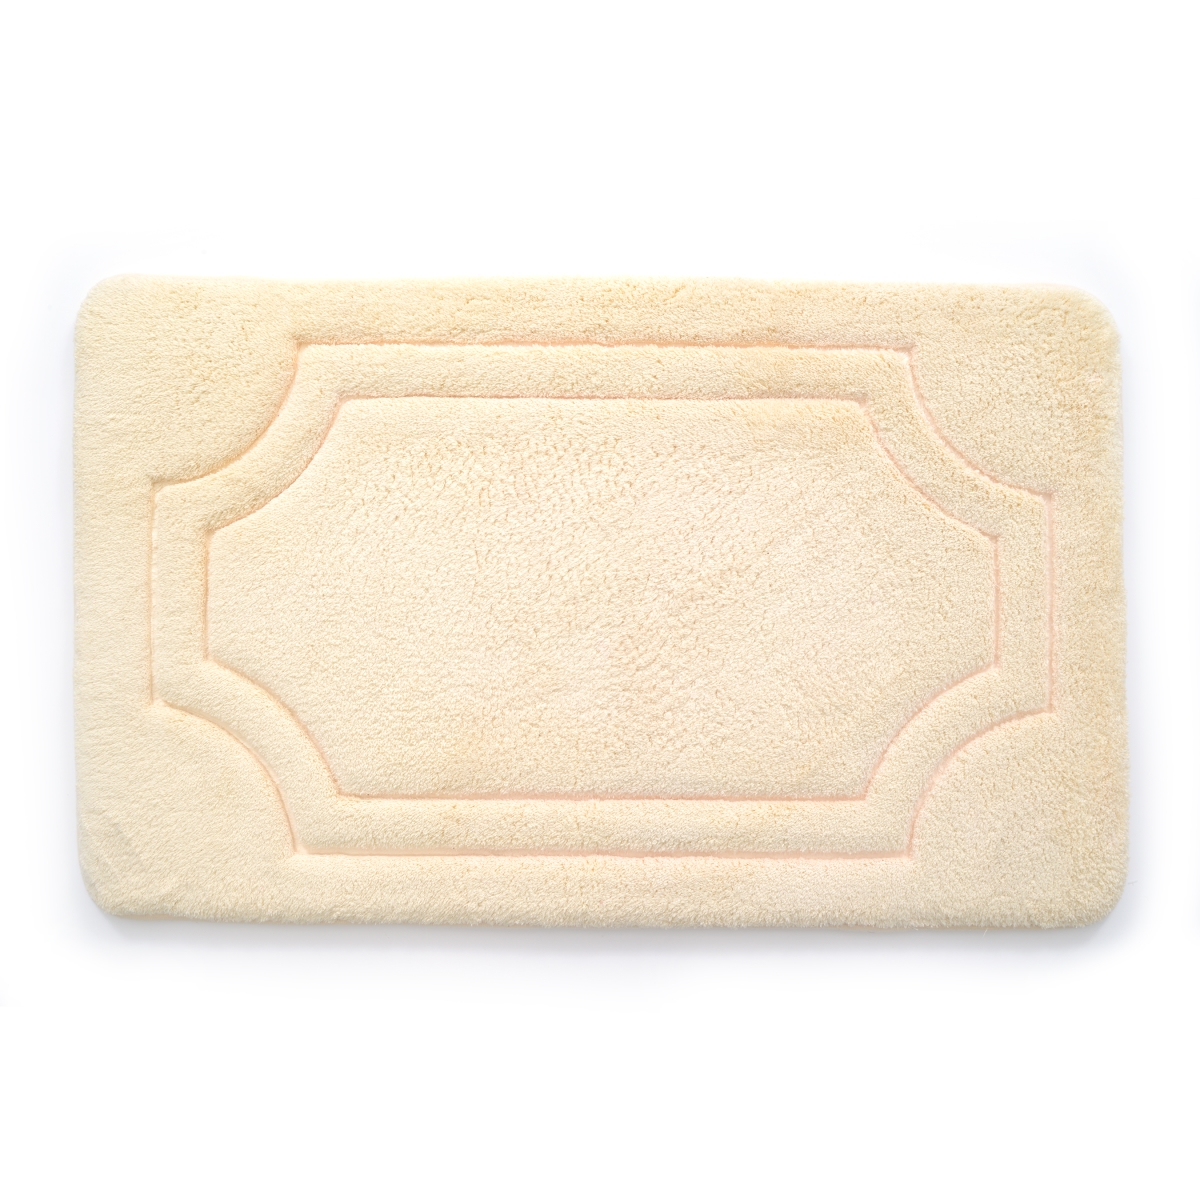 Bfdm-34c763-12 21 X 34 In. Luxurious Memory Foam Bath Mat With Water Shield Technology - Antique White